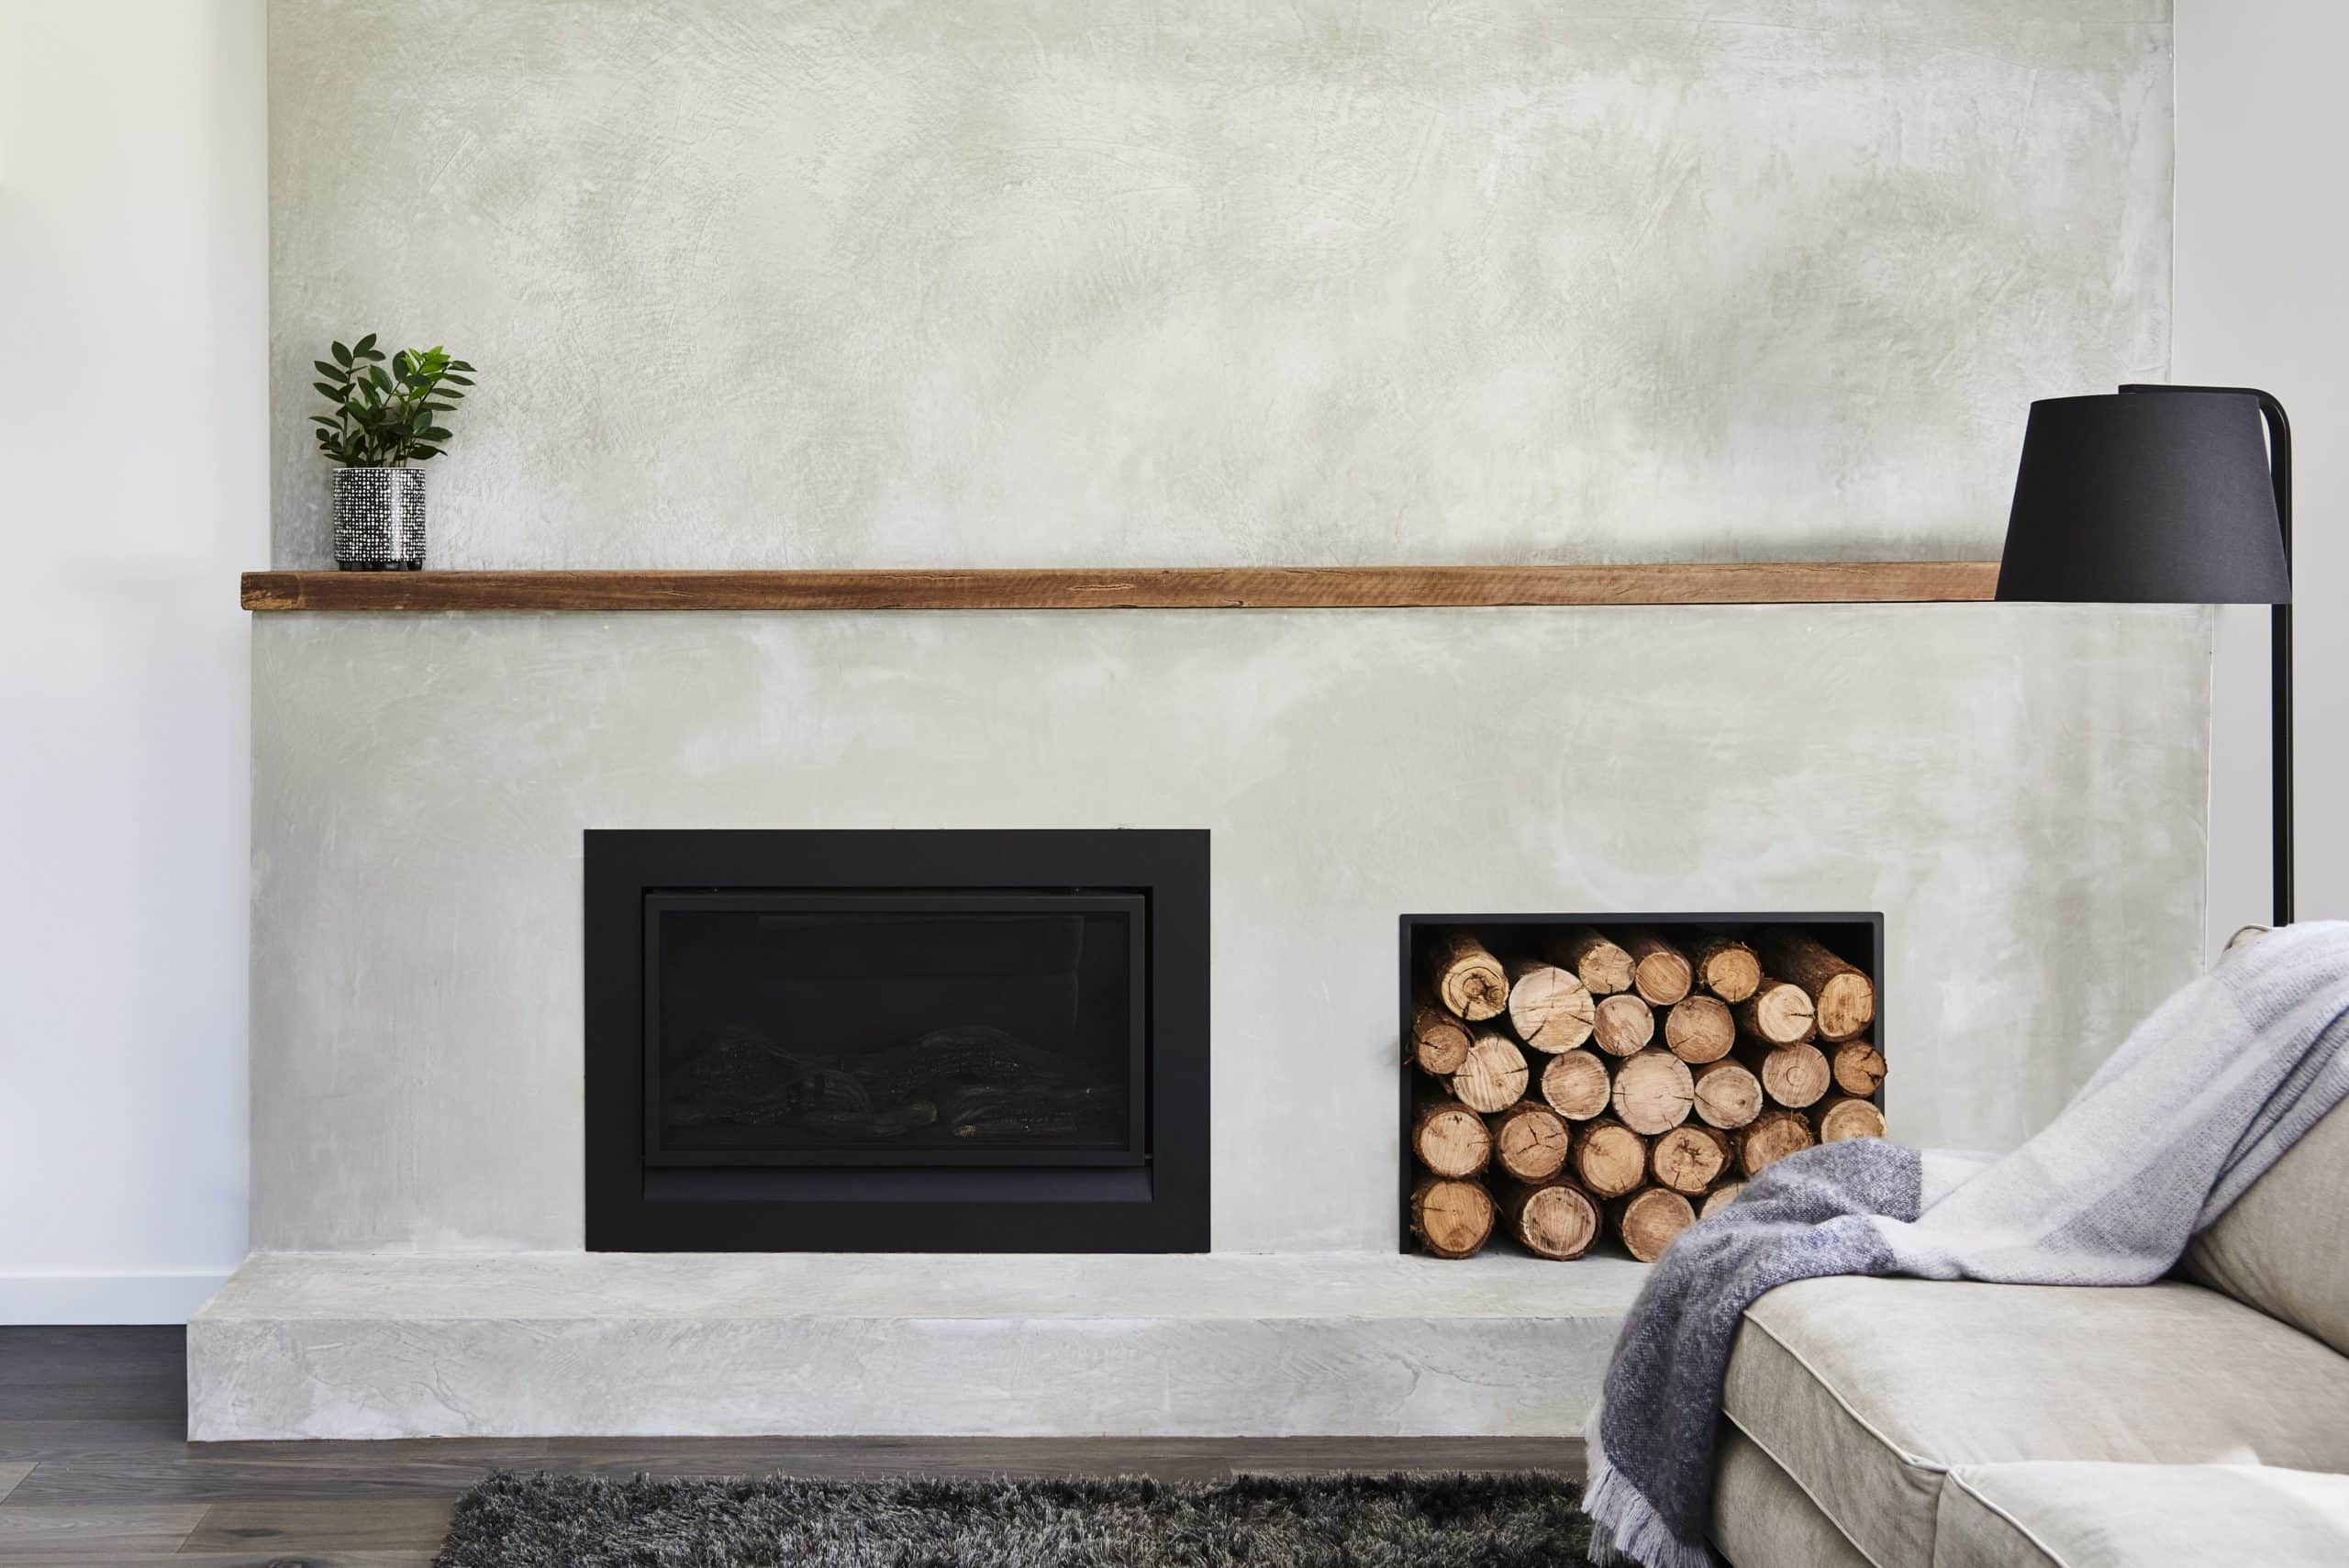 Fireplace in a custom home build in melbourne